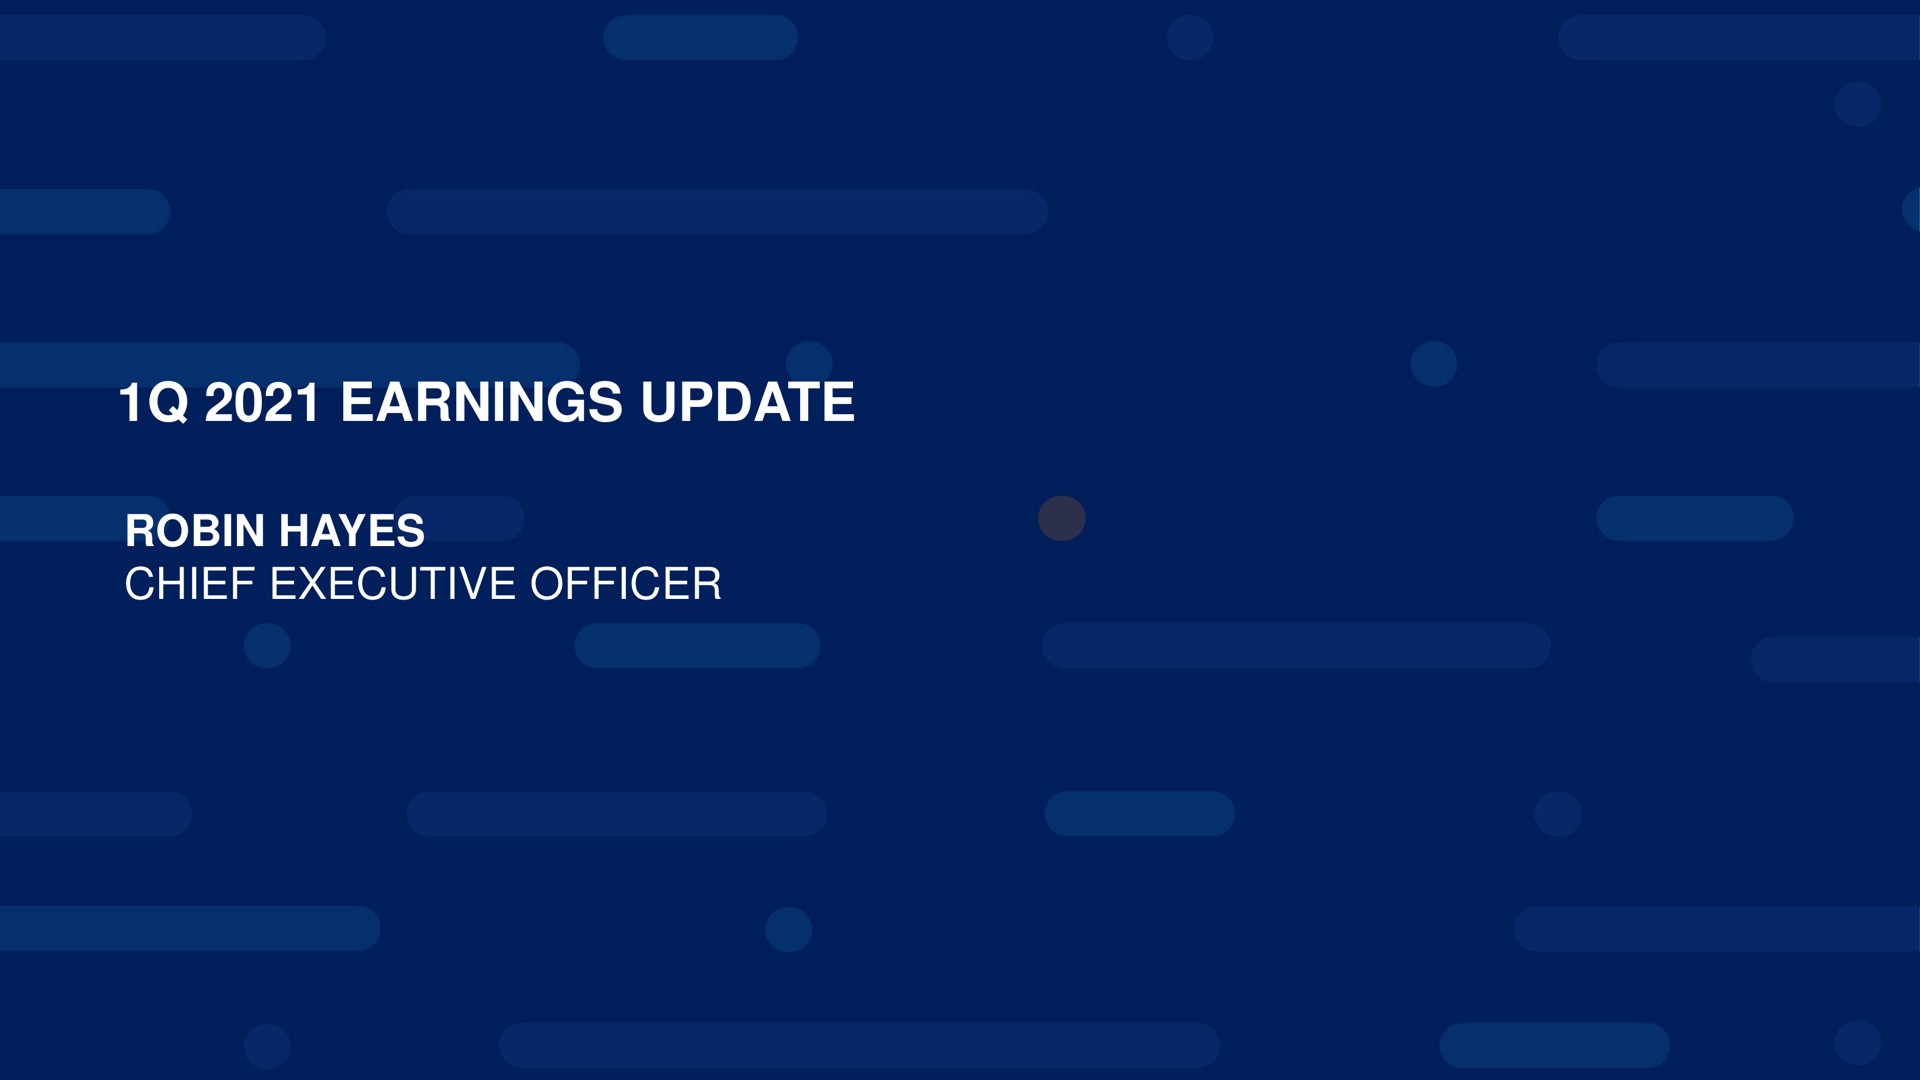 earnings update robin hayes chief executive officer | jetBlue